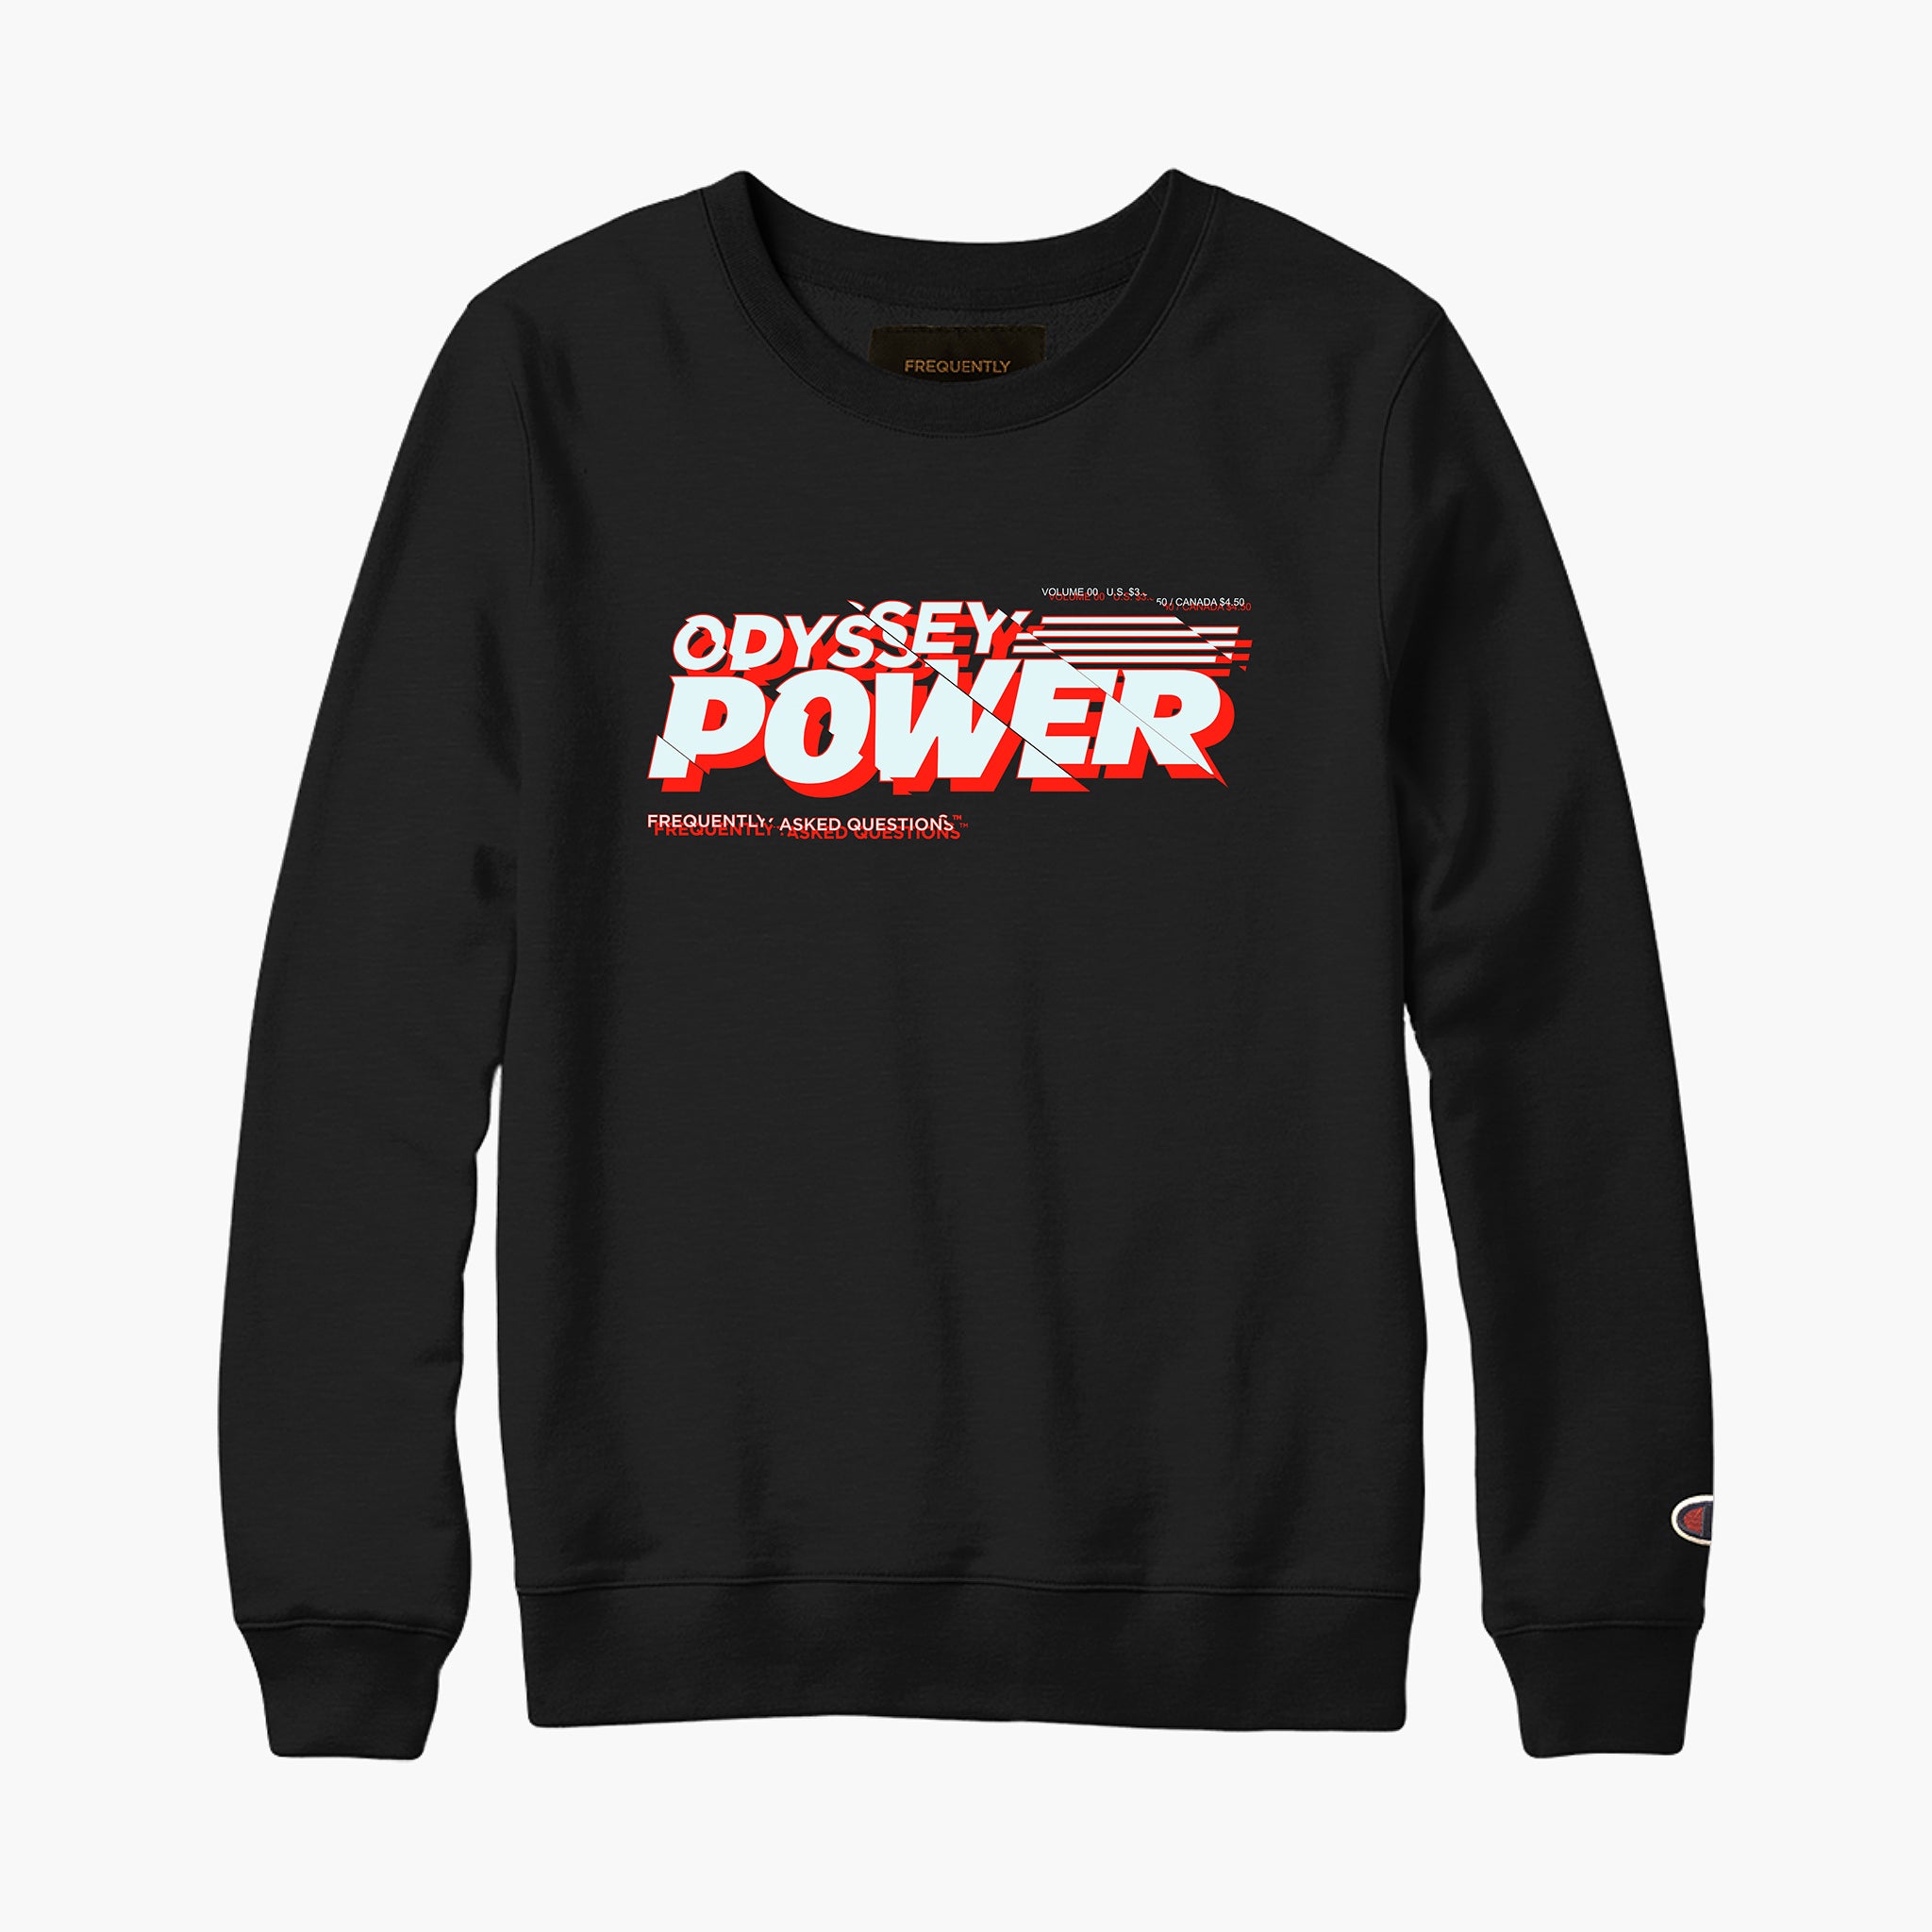 Odyssey Power Sweatshirt - Frequently Asked Questions